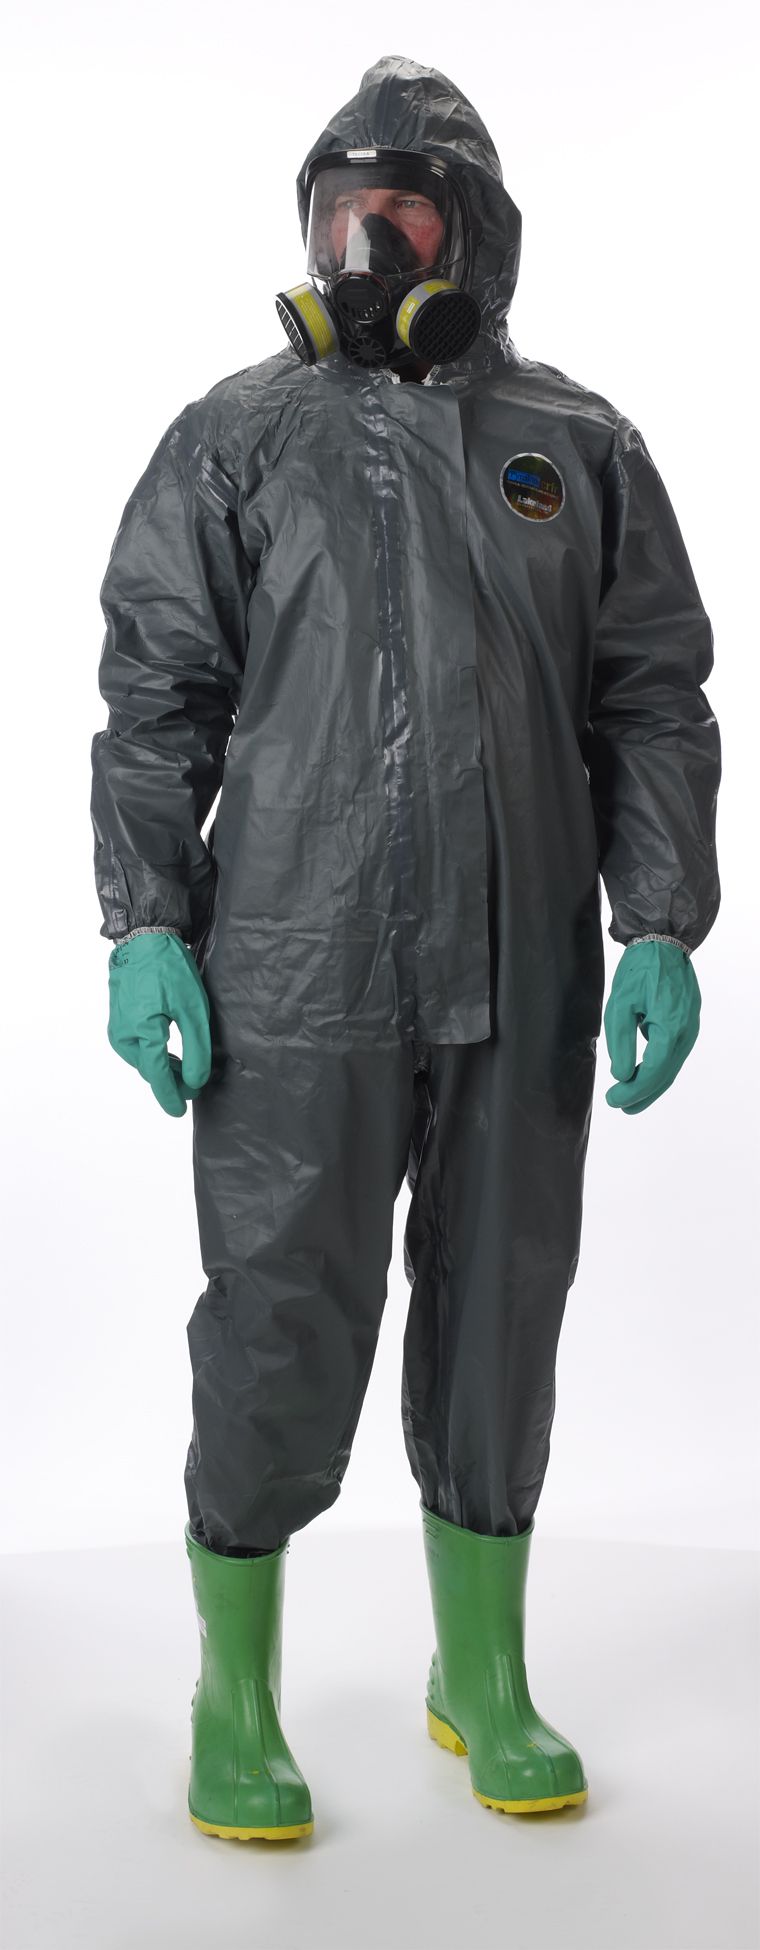 Lakeland Pyrolon CRFR Coverall Hood & attached Boots (Case of 6)